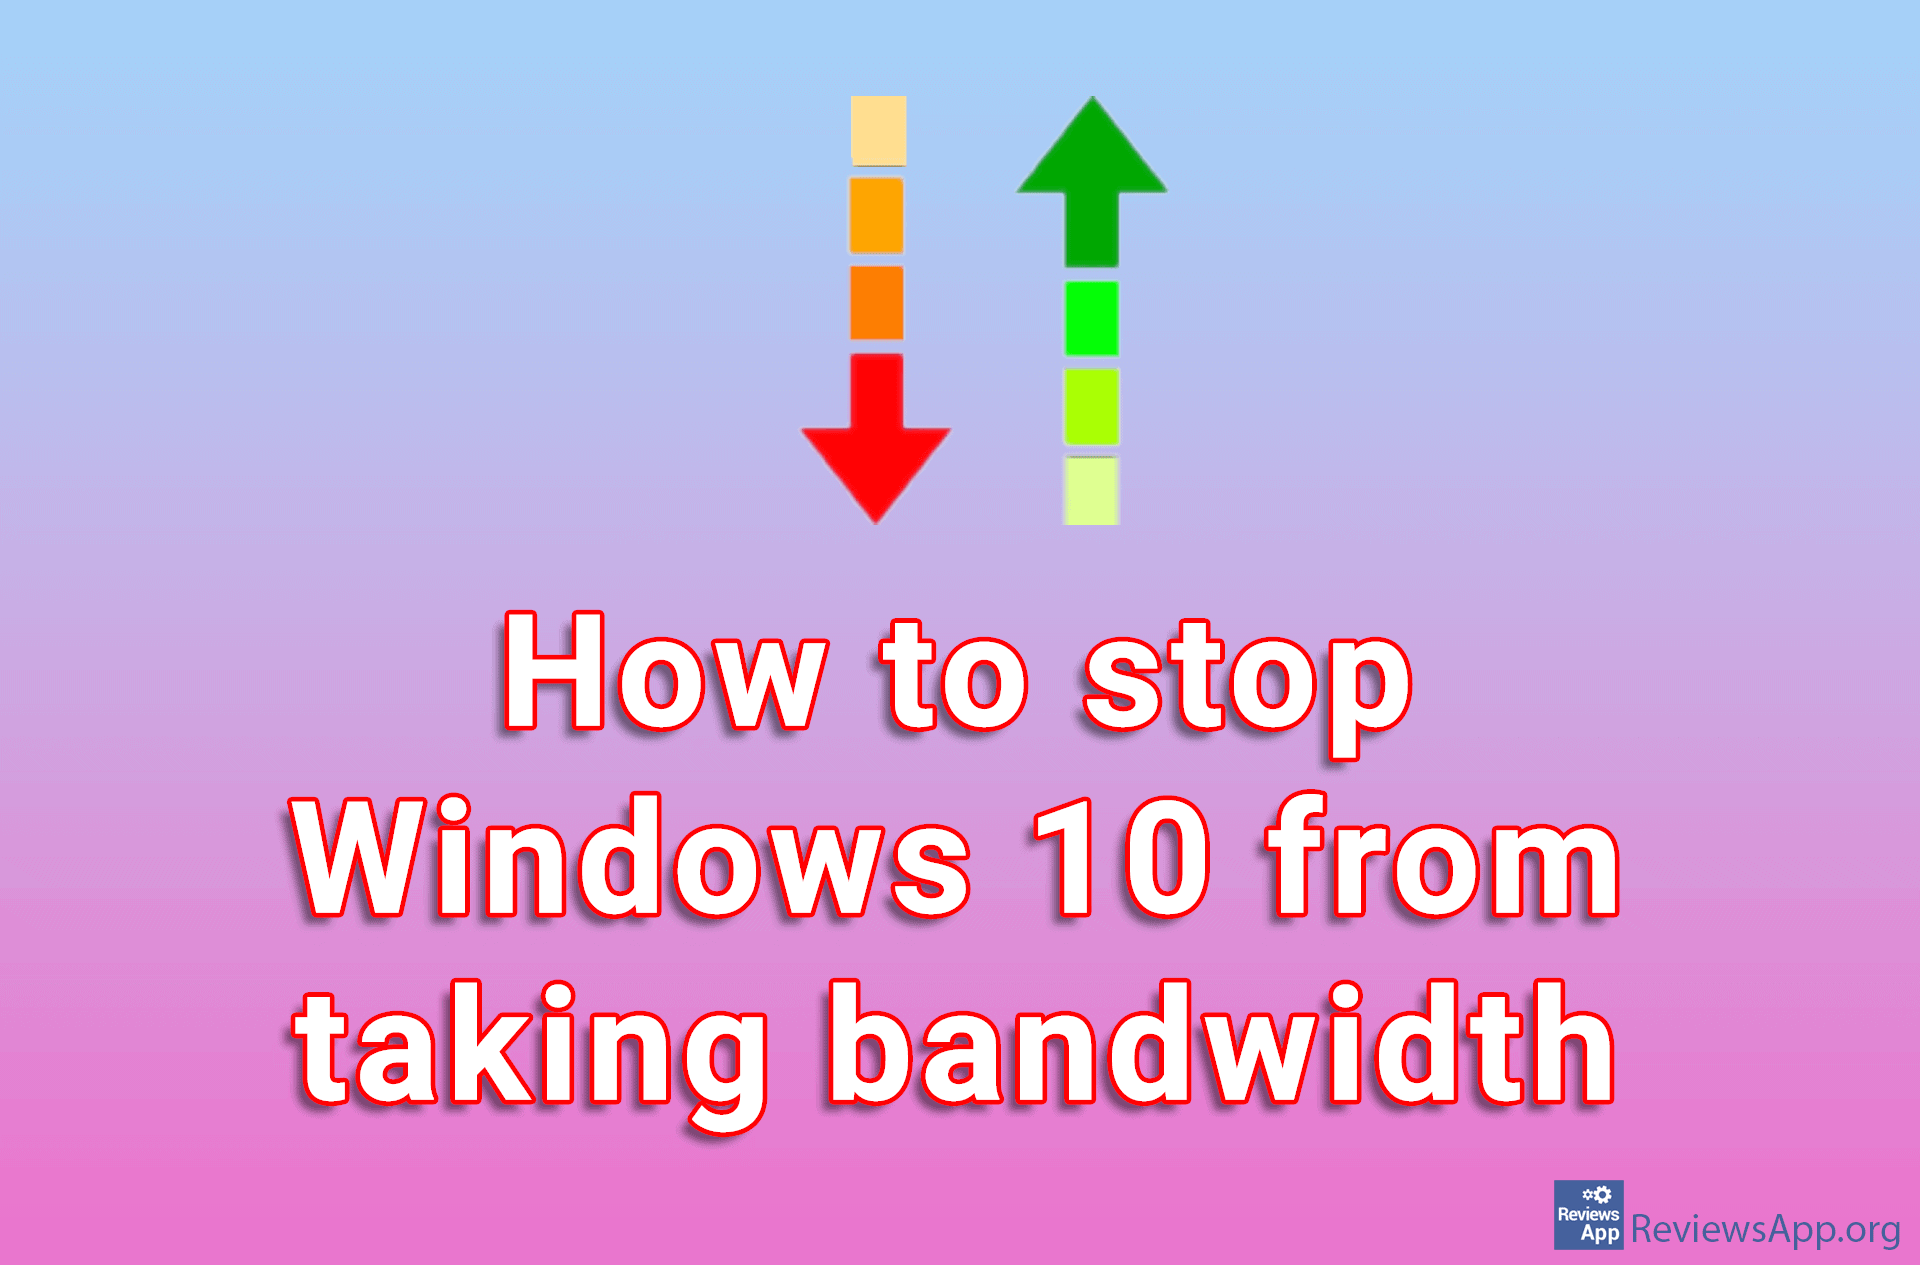 How to stop Windows 10 from taking bandwidth